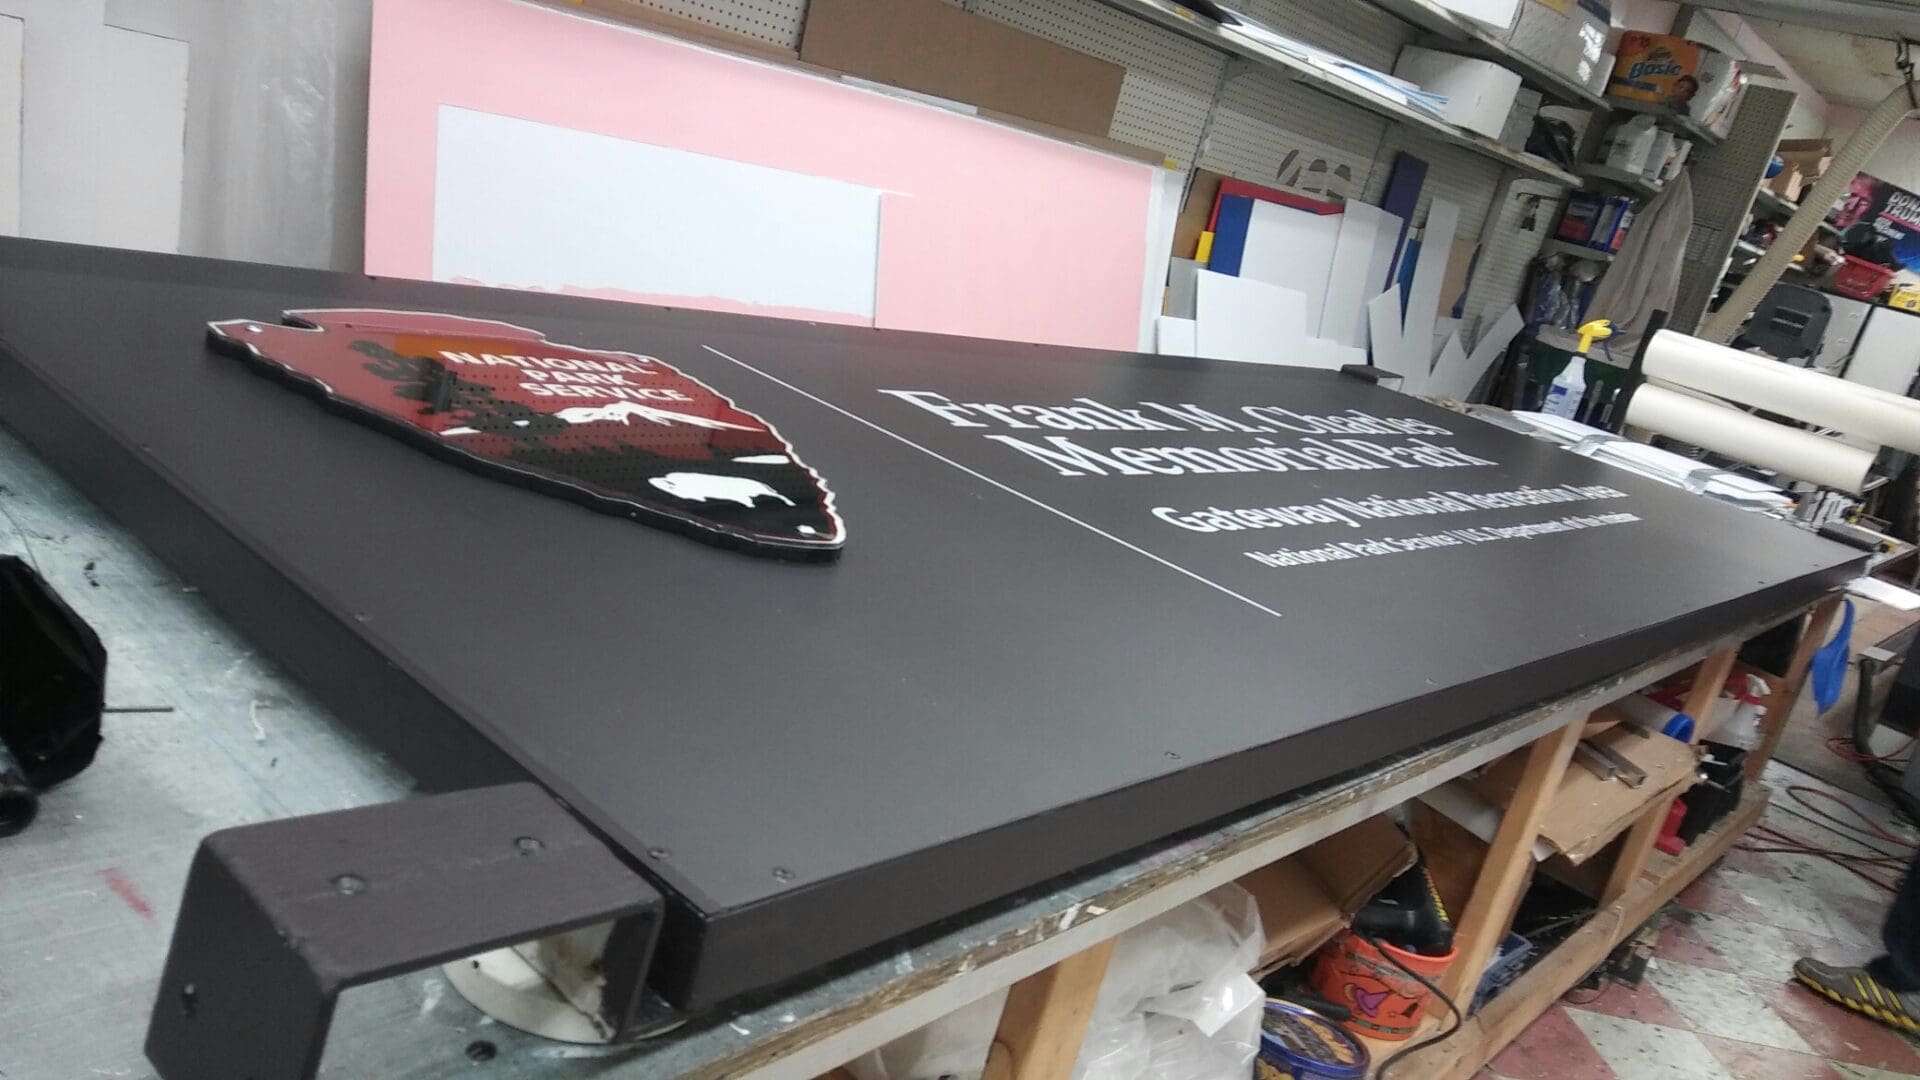 Large black sign with white text and a colorful graphic design for ADP USA Solutions Gallery, laying on a worktable in a workshop.